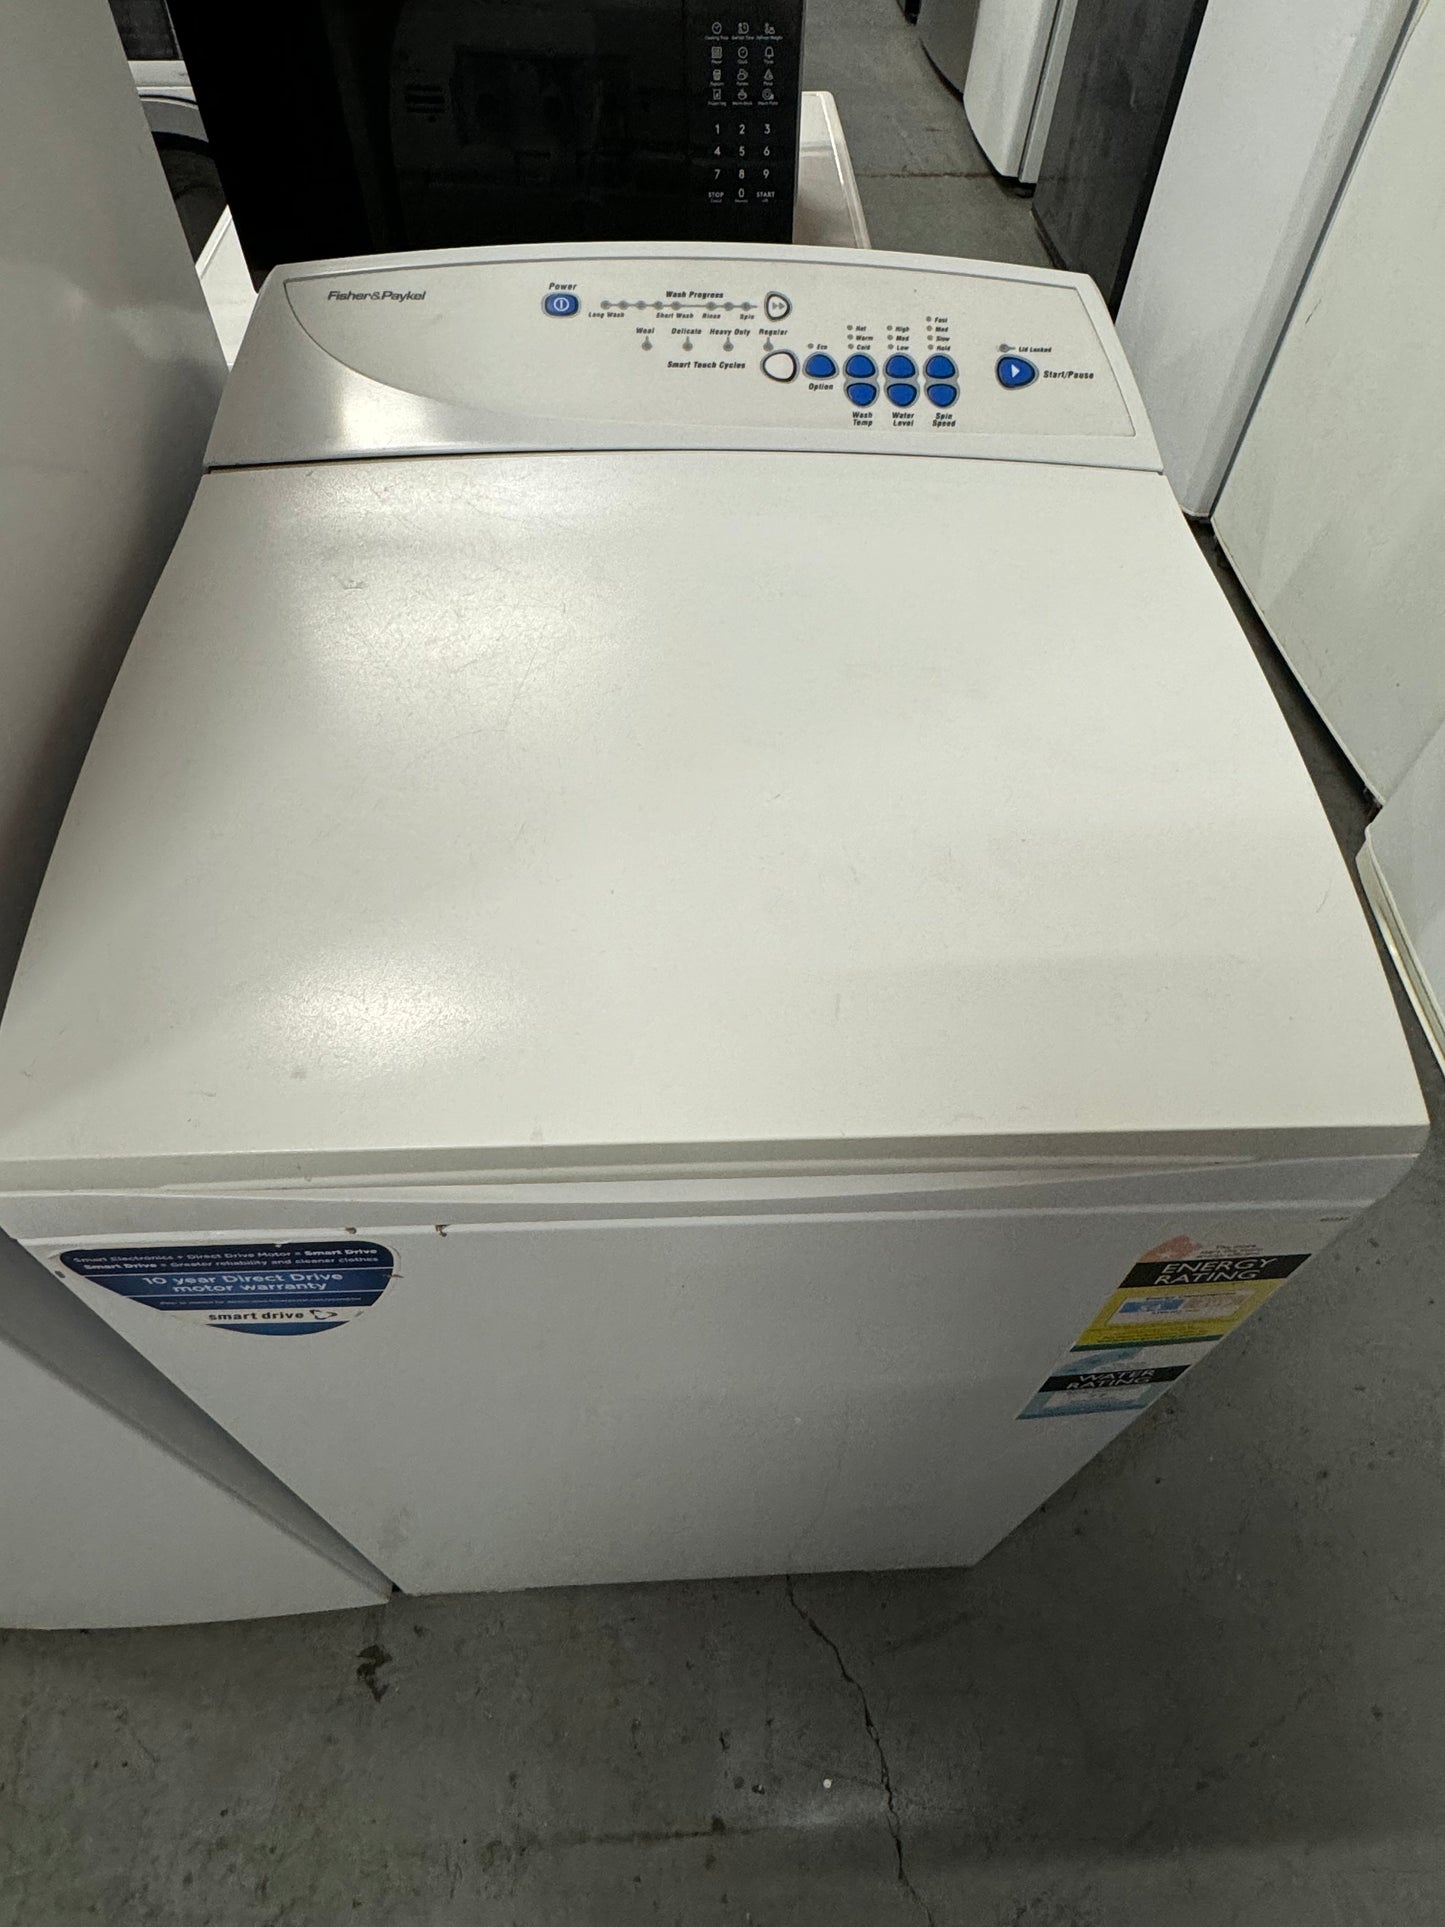 HAIER 200L FRIDGE FREEZER AND FISHER & PAYKEL 5.5 KGS WASHER | SYDNEY